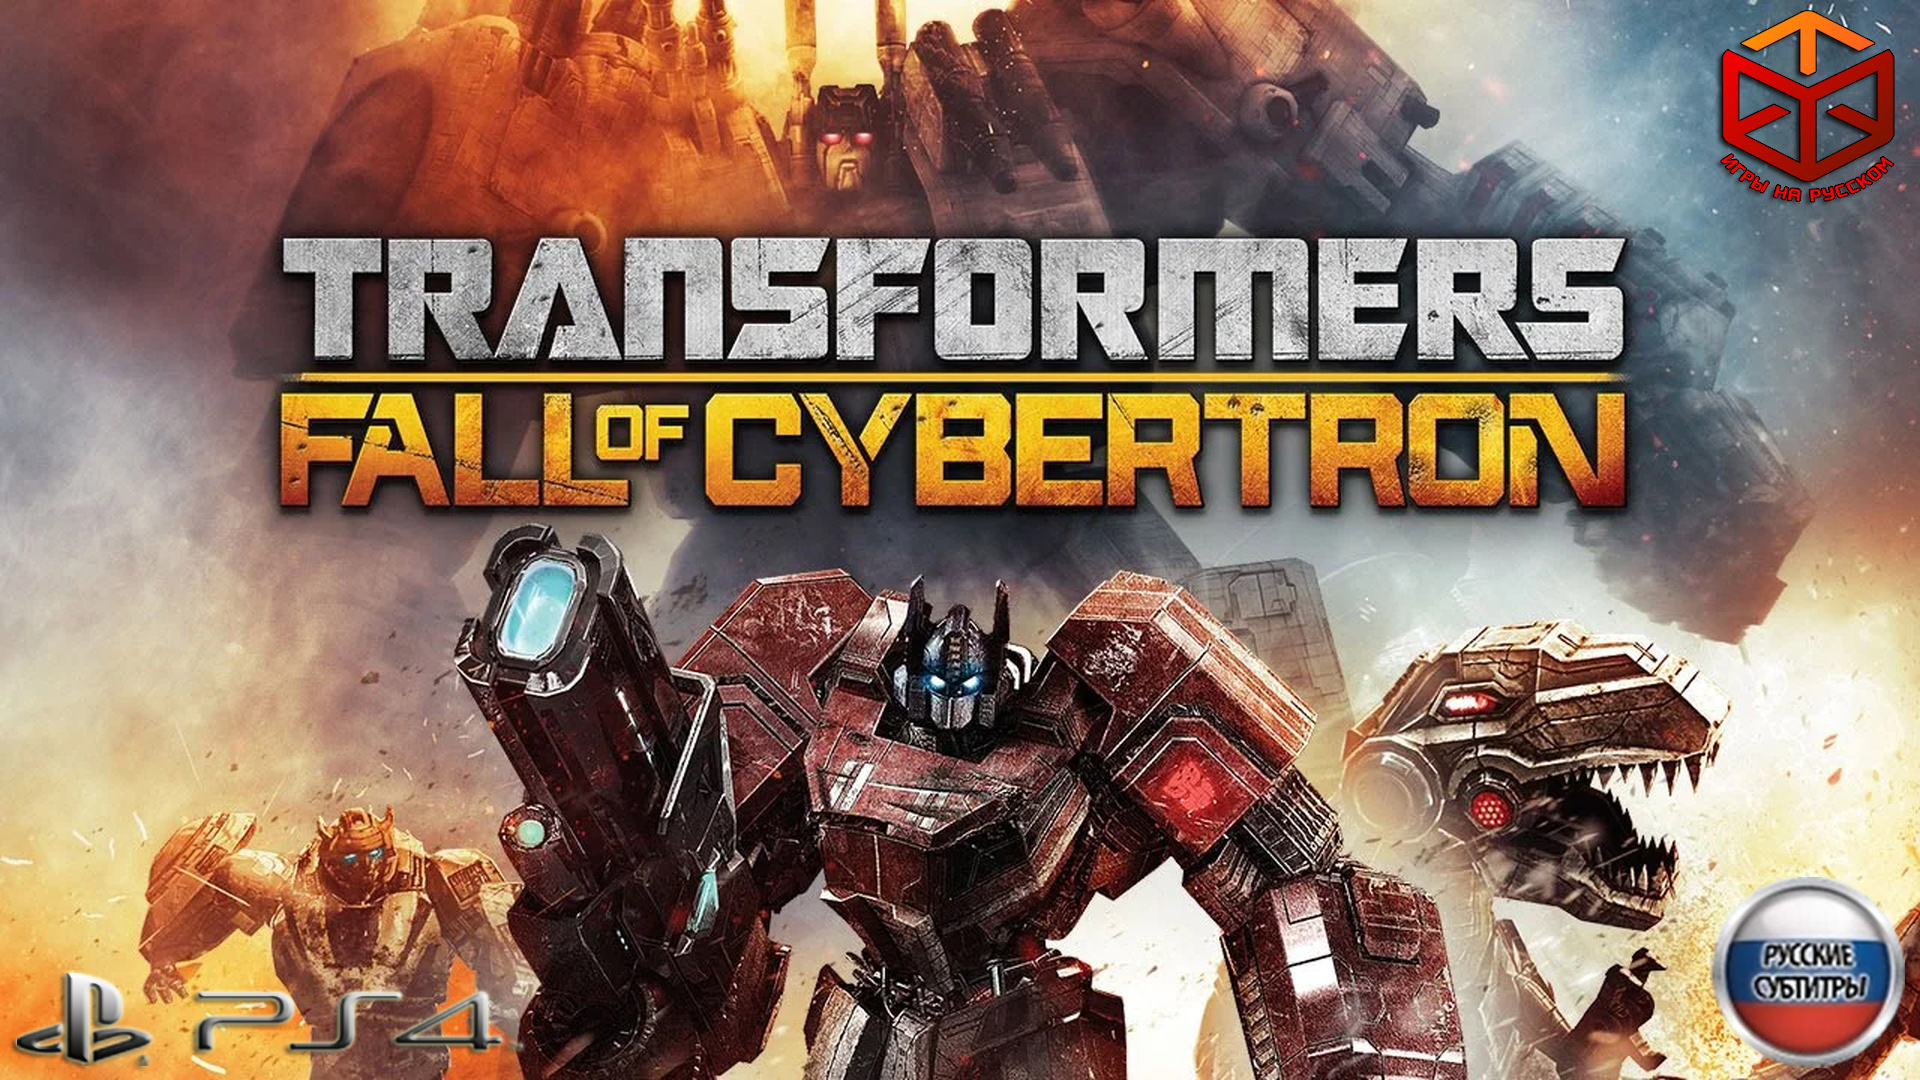 Transformers steam. Transformers Fall of Cybertron. Transformers Fall of Cybertron ps3 Постер. Transformers Cybertron. Трансформеры Fall of Cybertron игра.